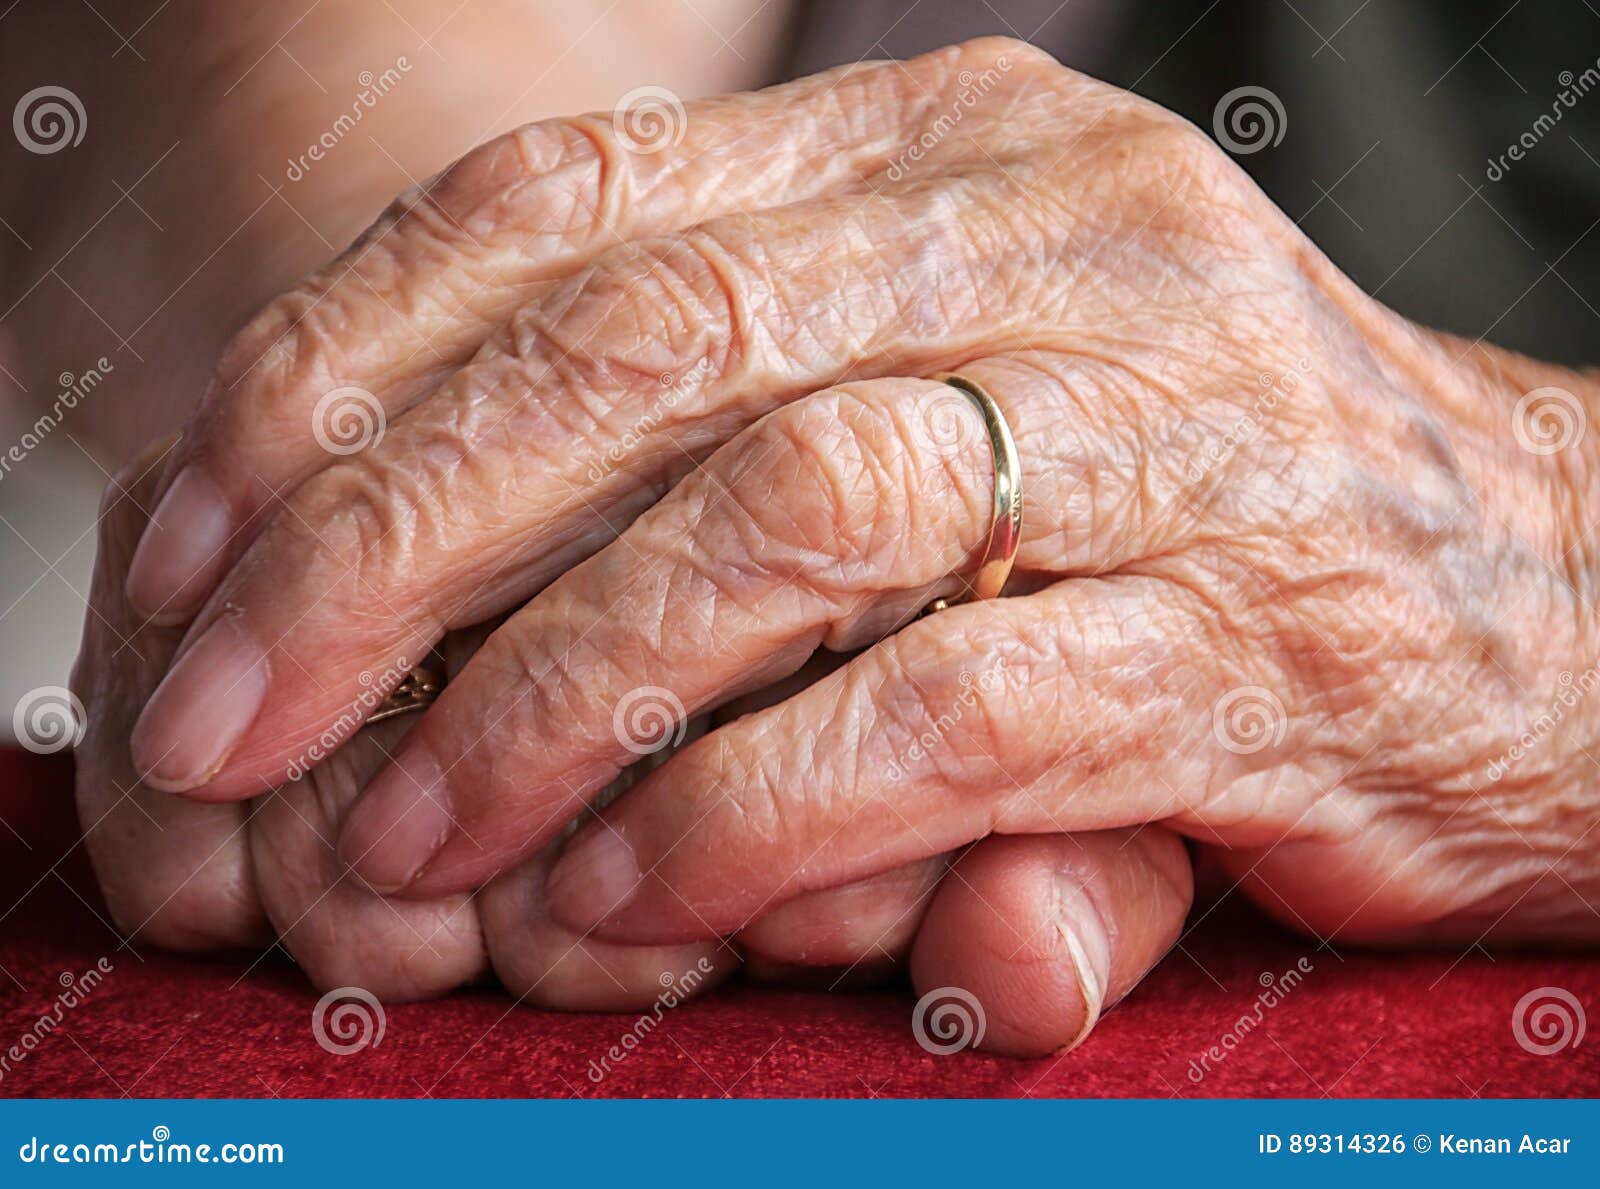 old woman hand